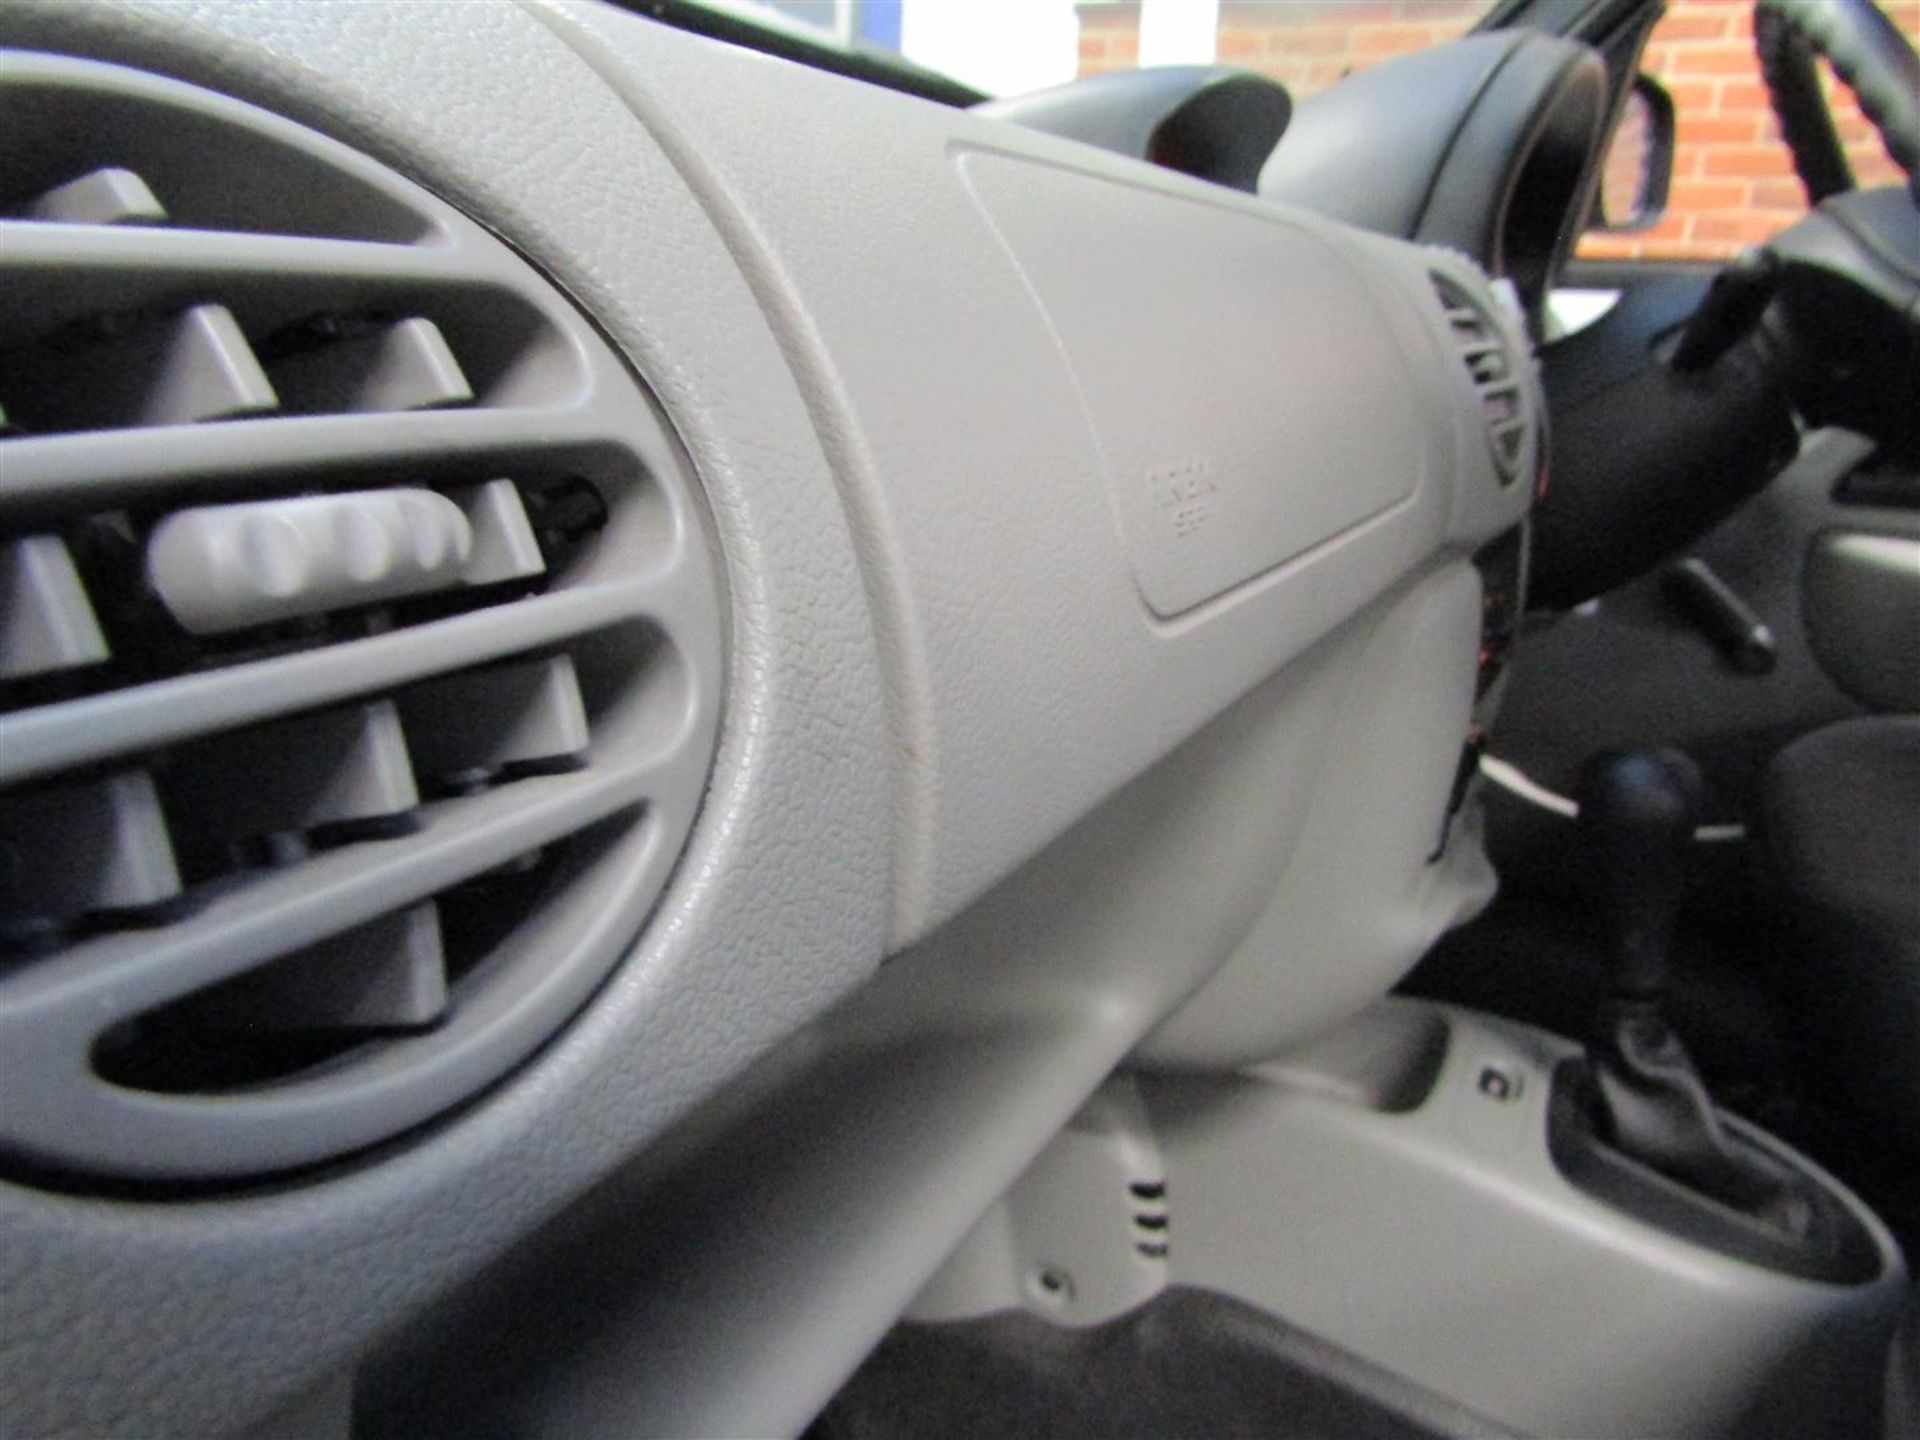 08 08 Renault Kangoo Authentique A - Image 10 of 28